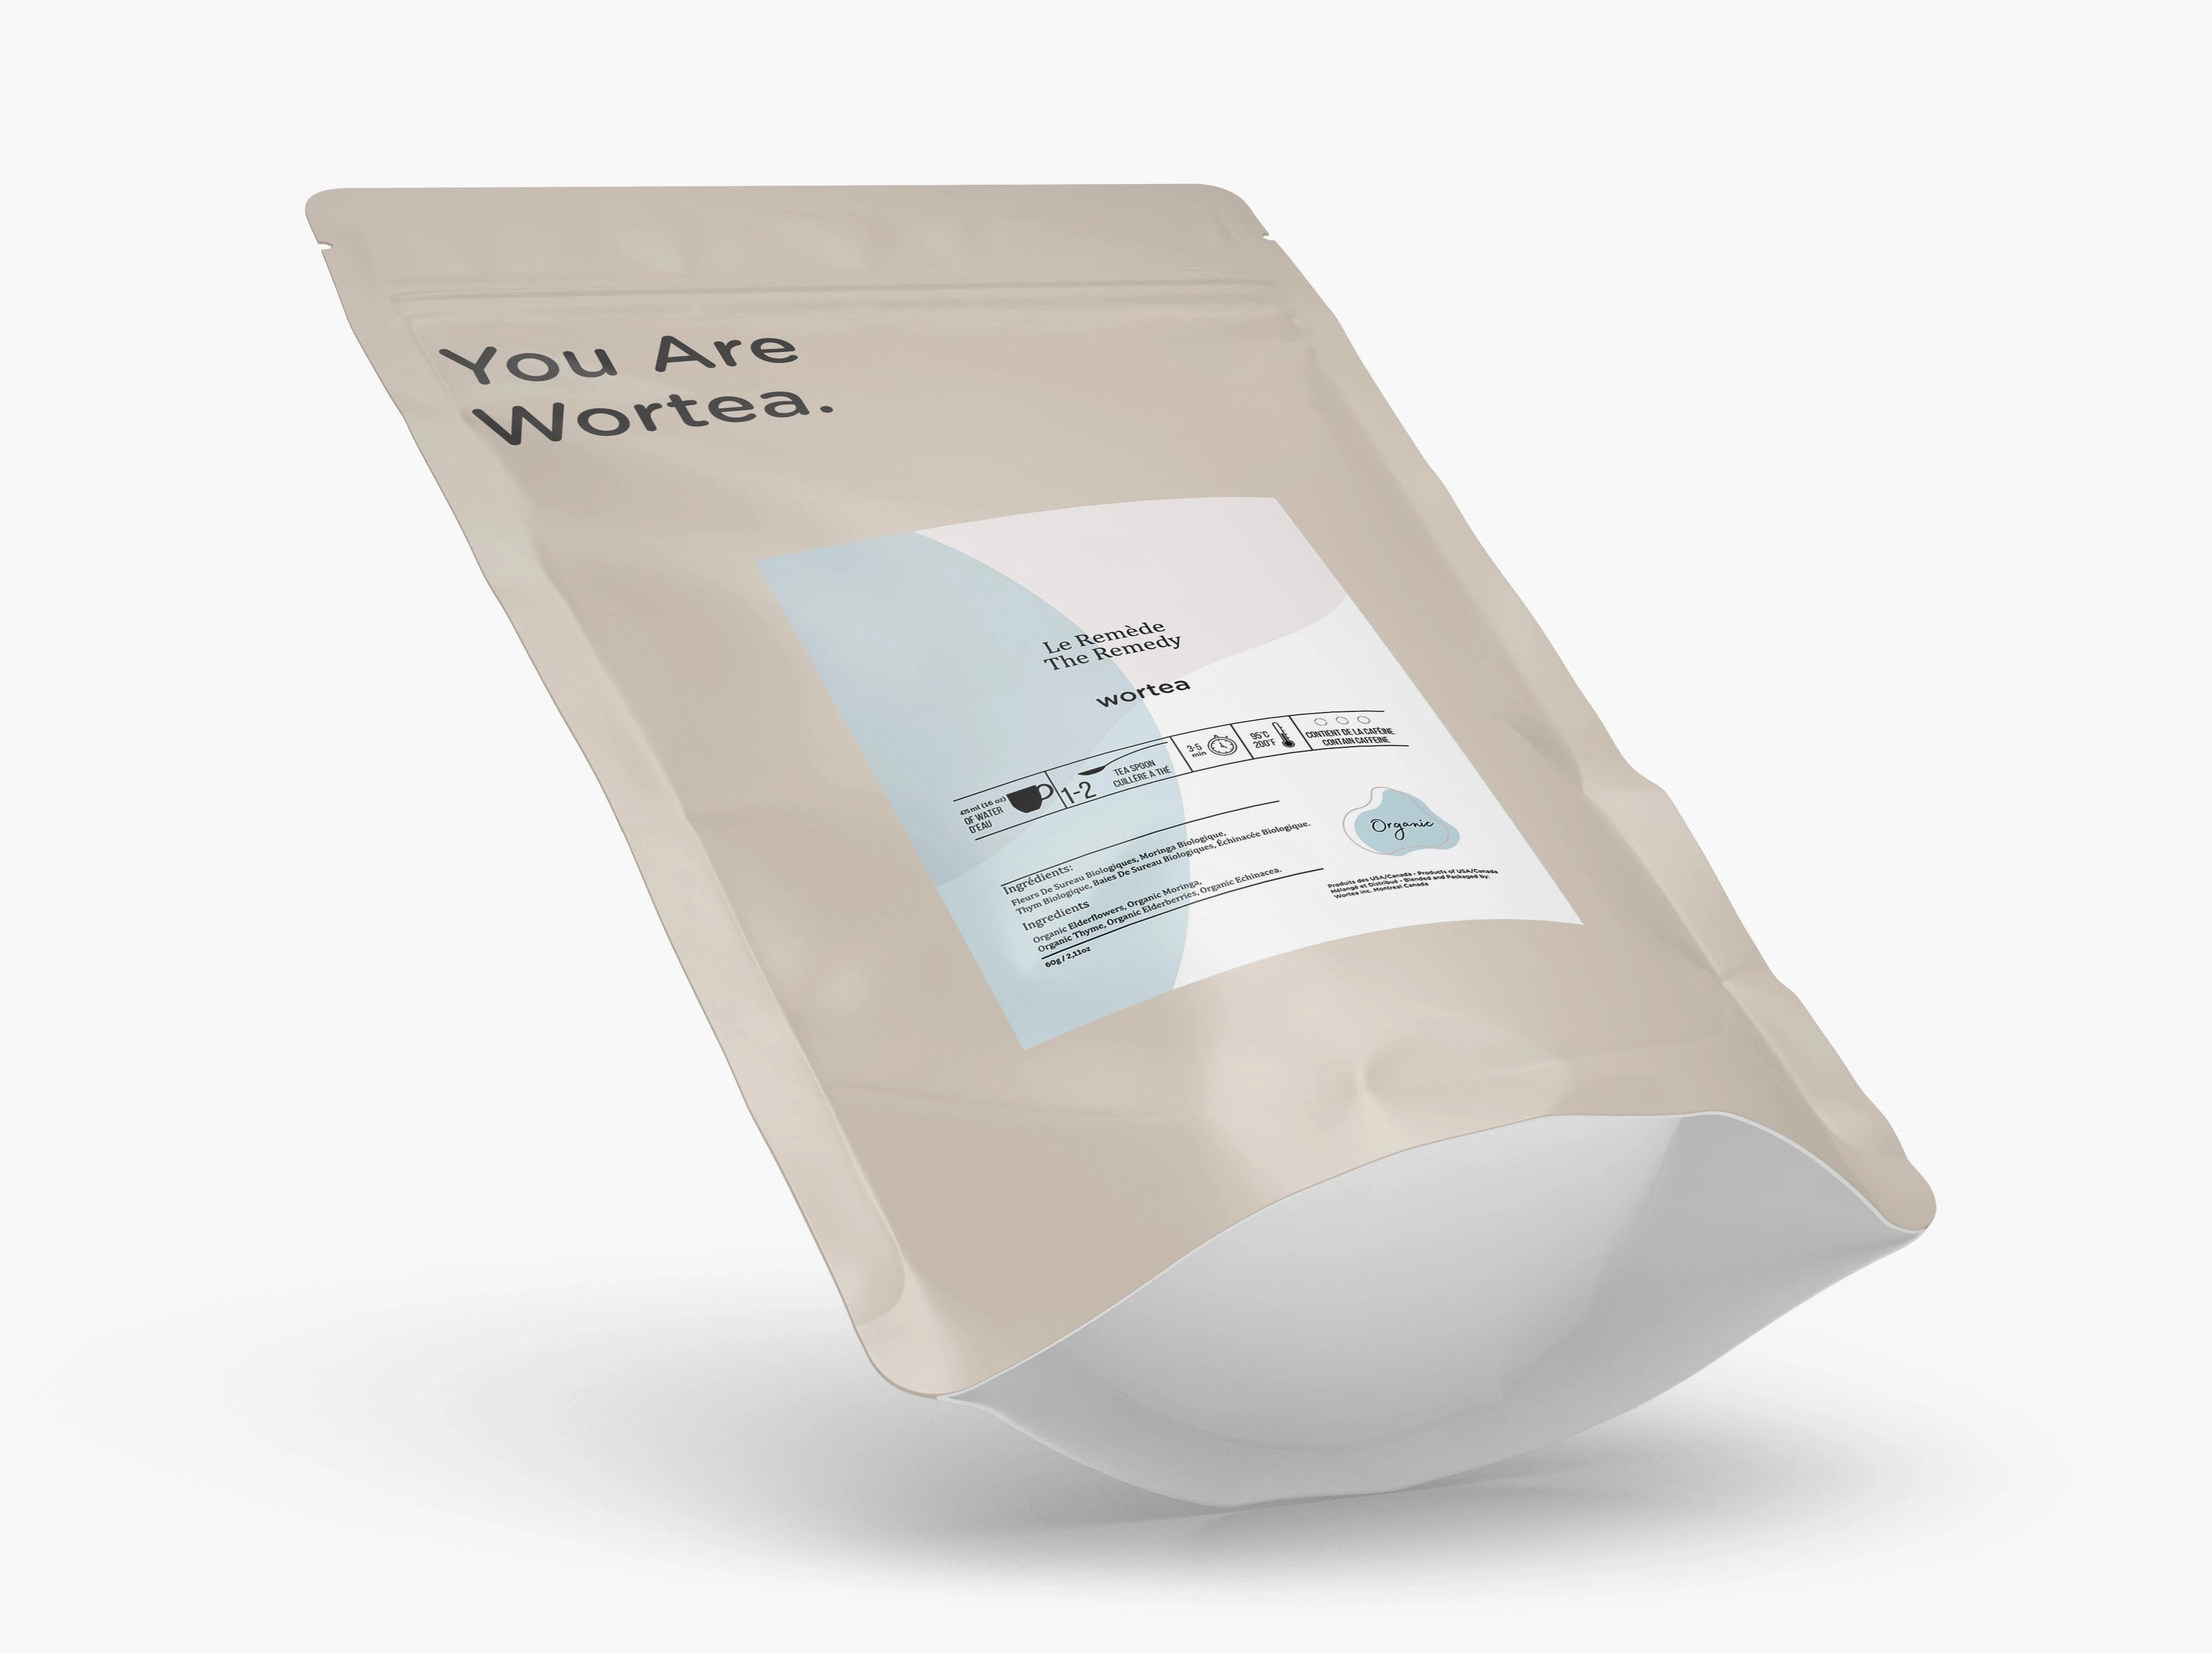 A teab bag of tea blend for cold and flu